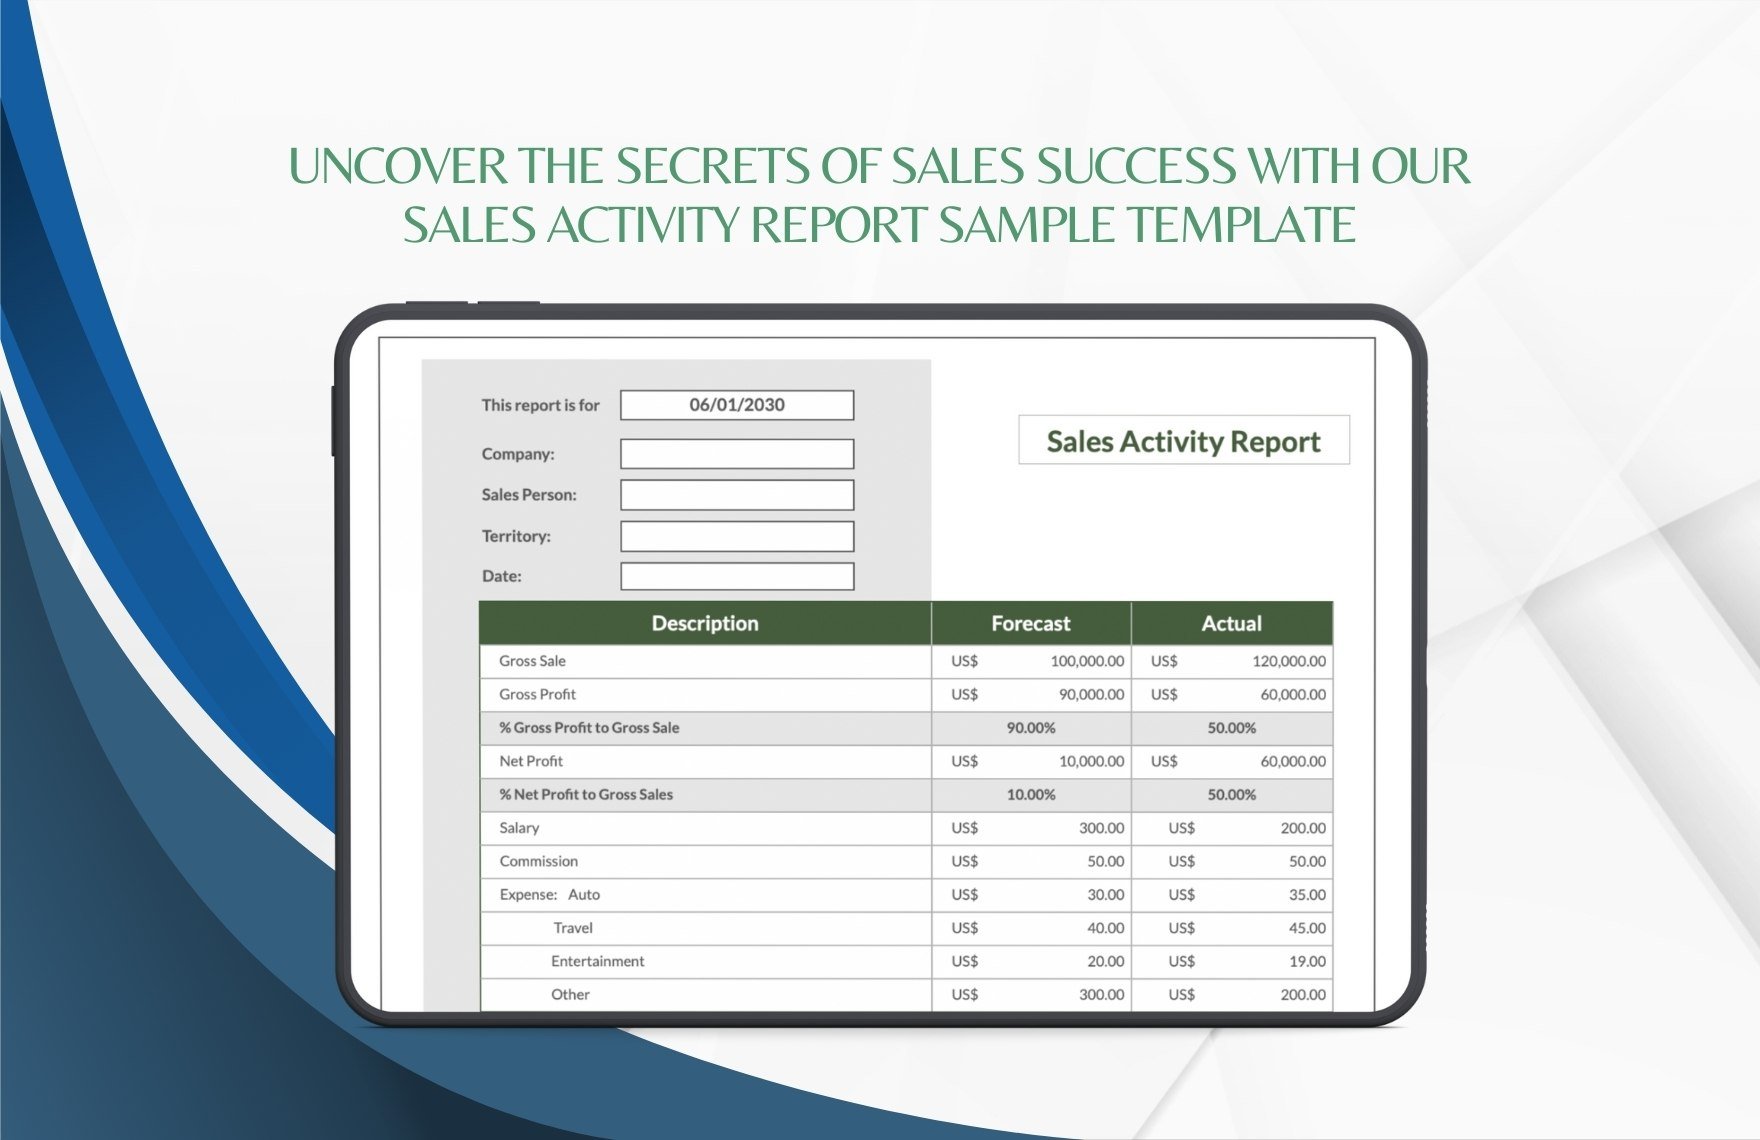 Sales Activity Report Sample Template